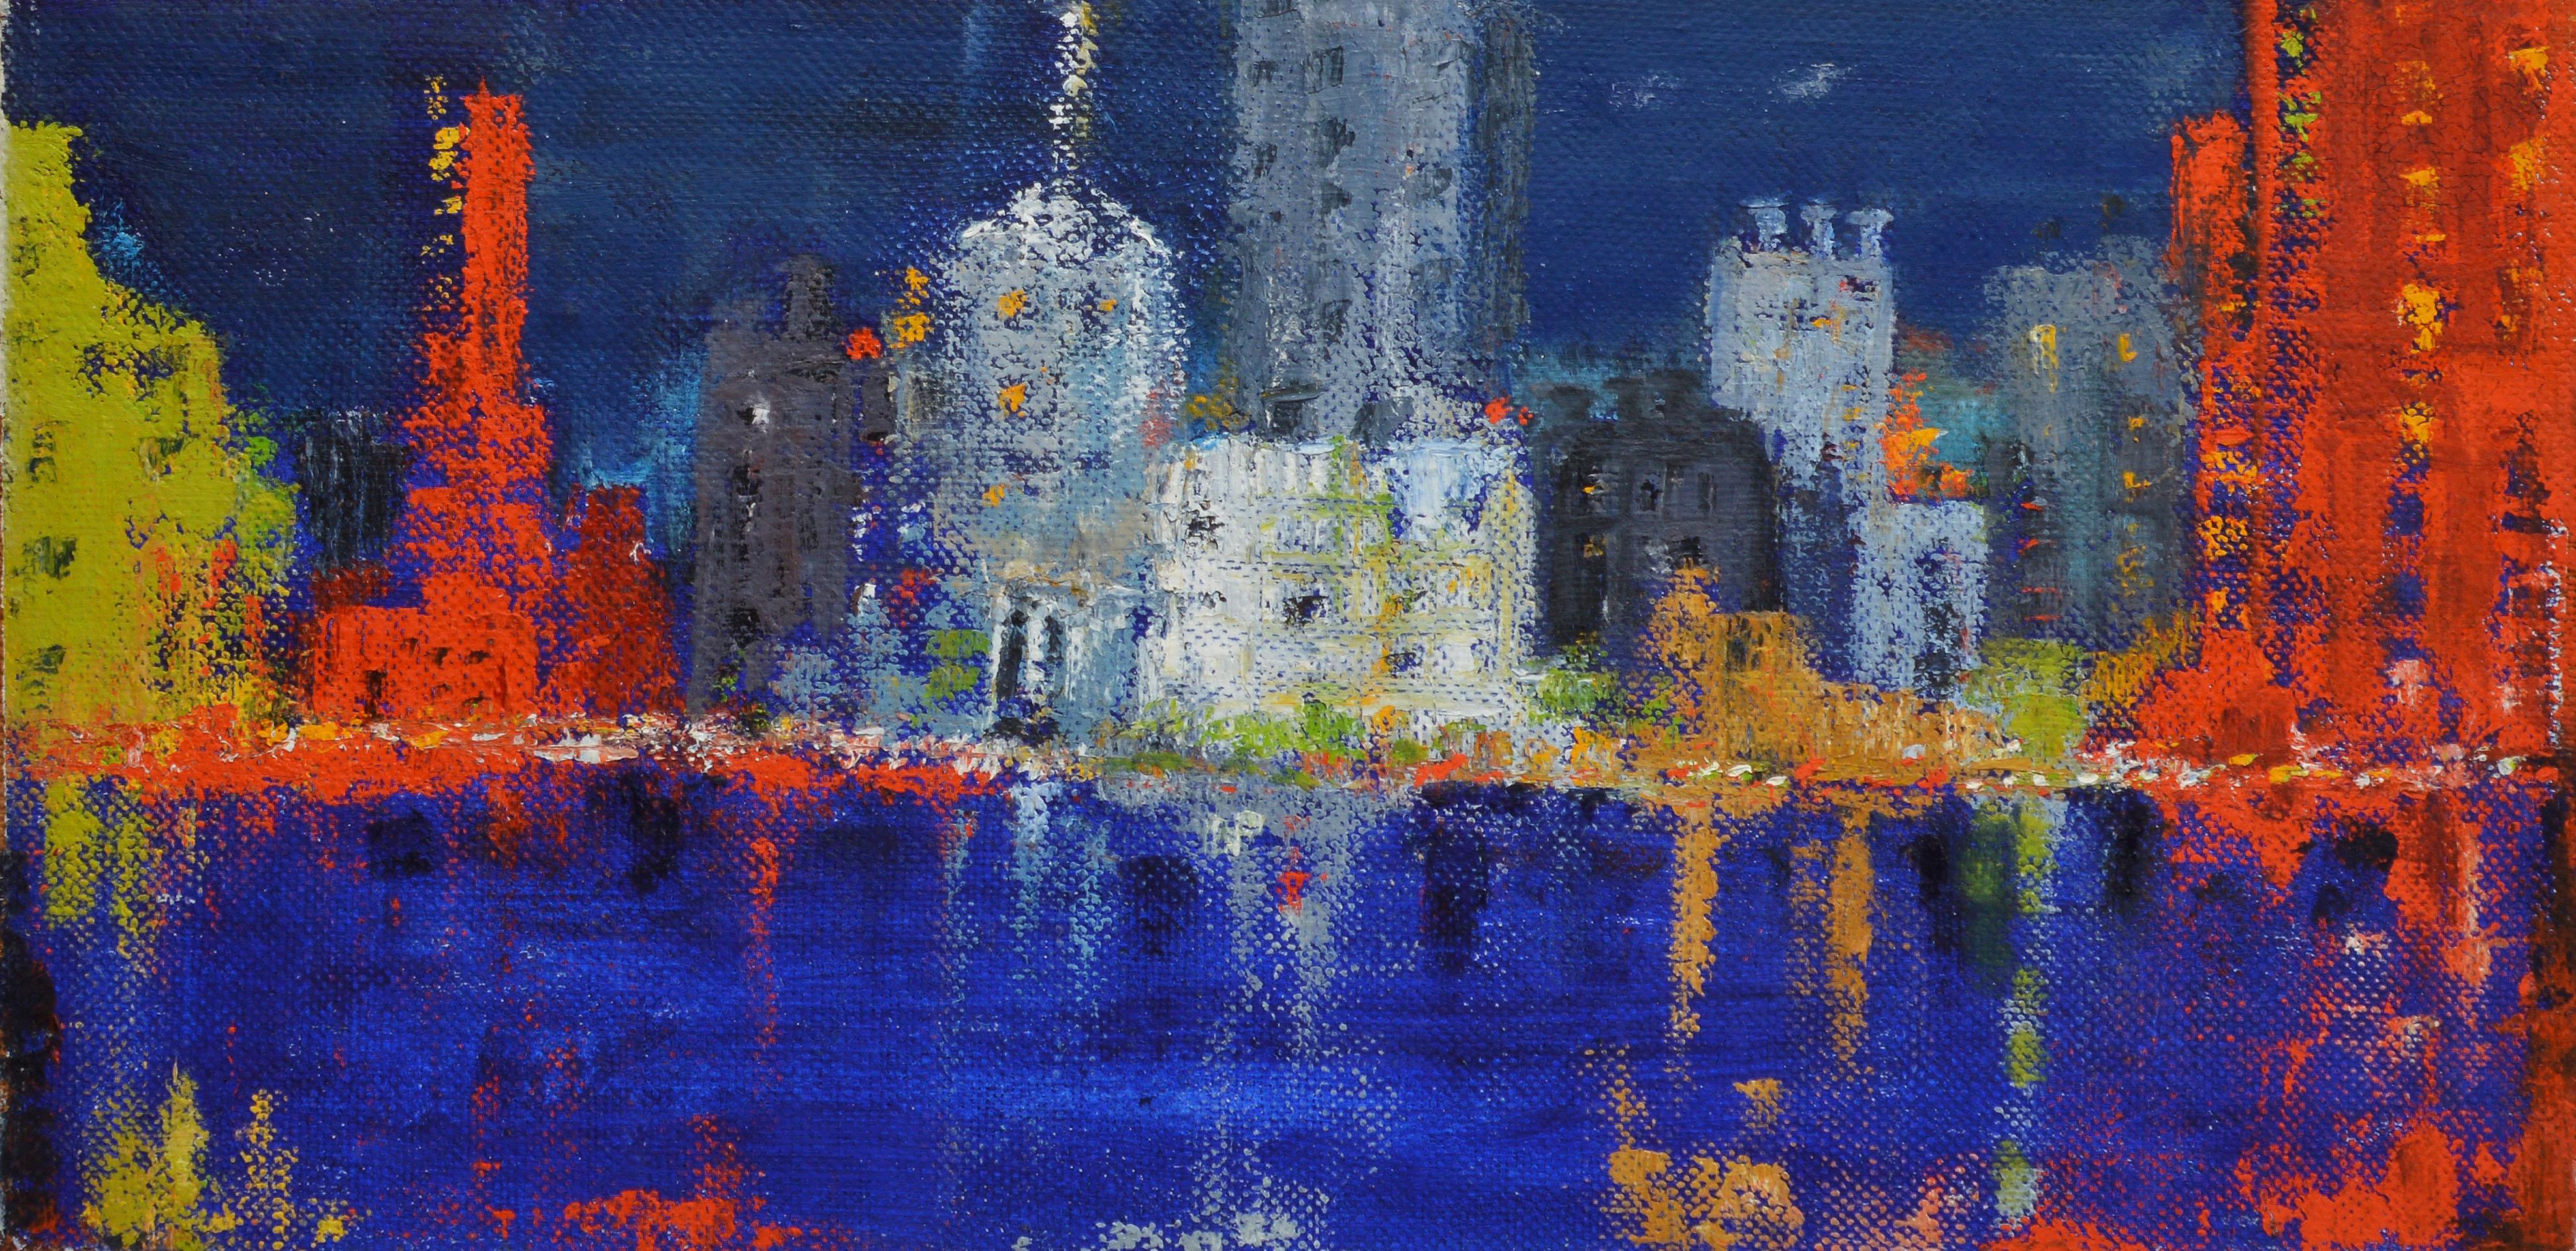 American School Abstracted Philadelphia Cityscape - Modern Painting by Unknown